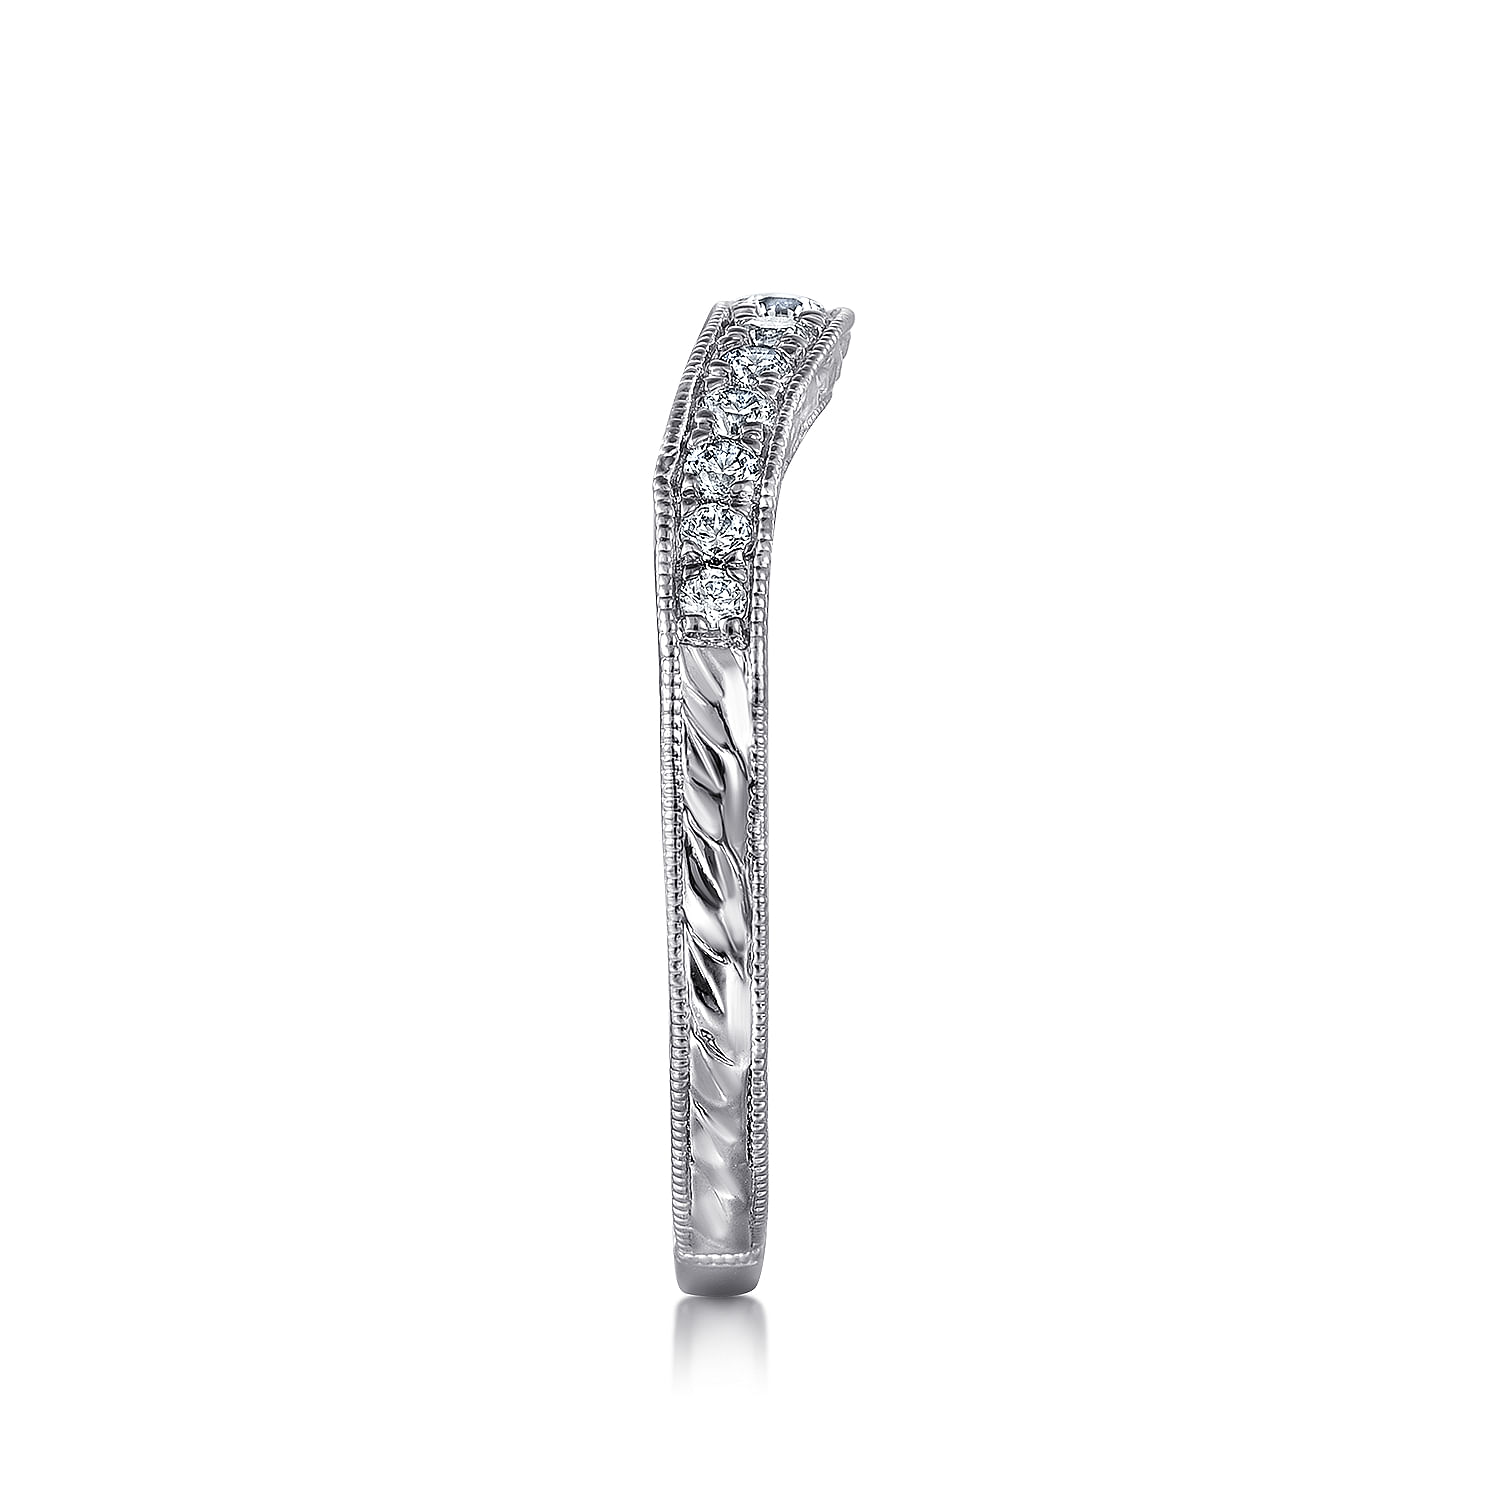 Vintage Inspired  Curved 14K White Gold Micro Pavé Diamond Wedding Band with Engraving